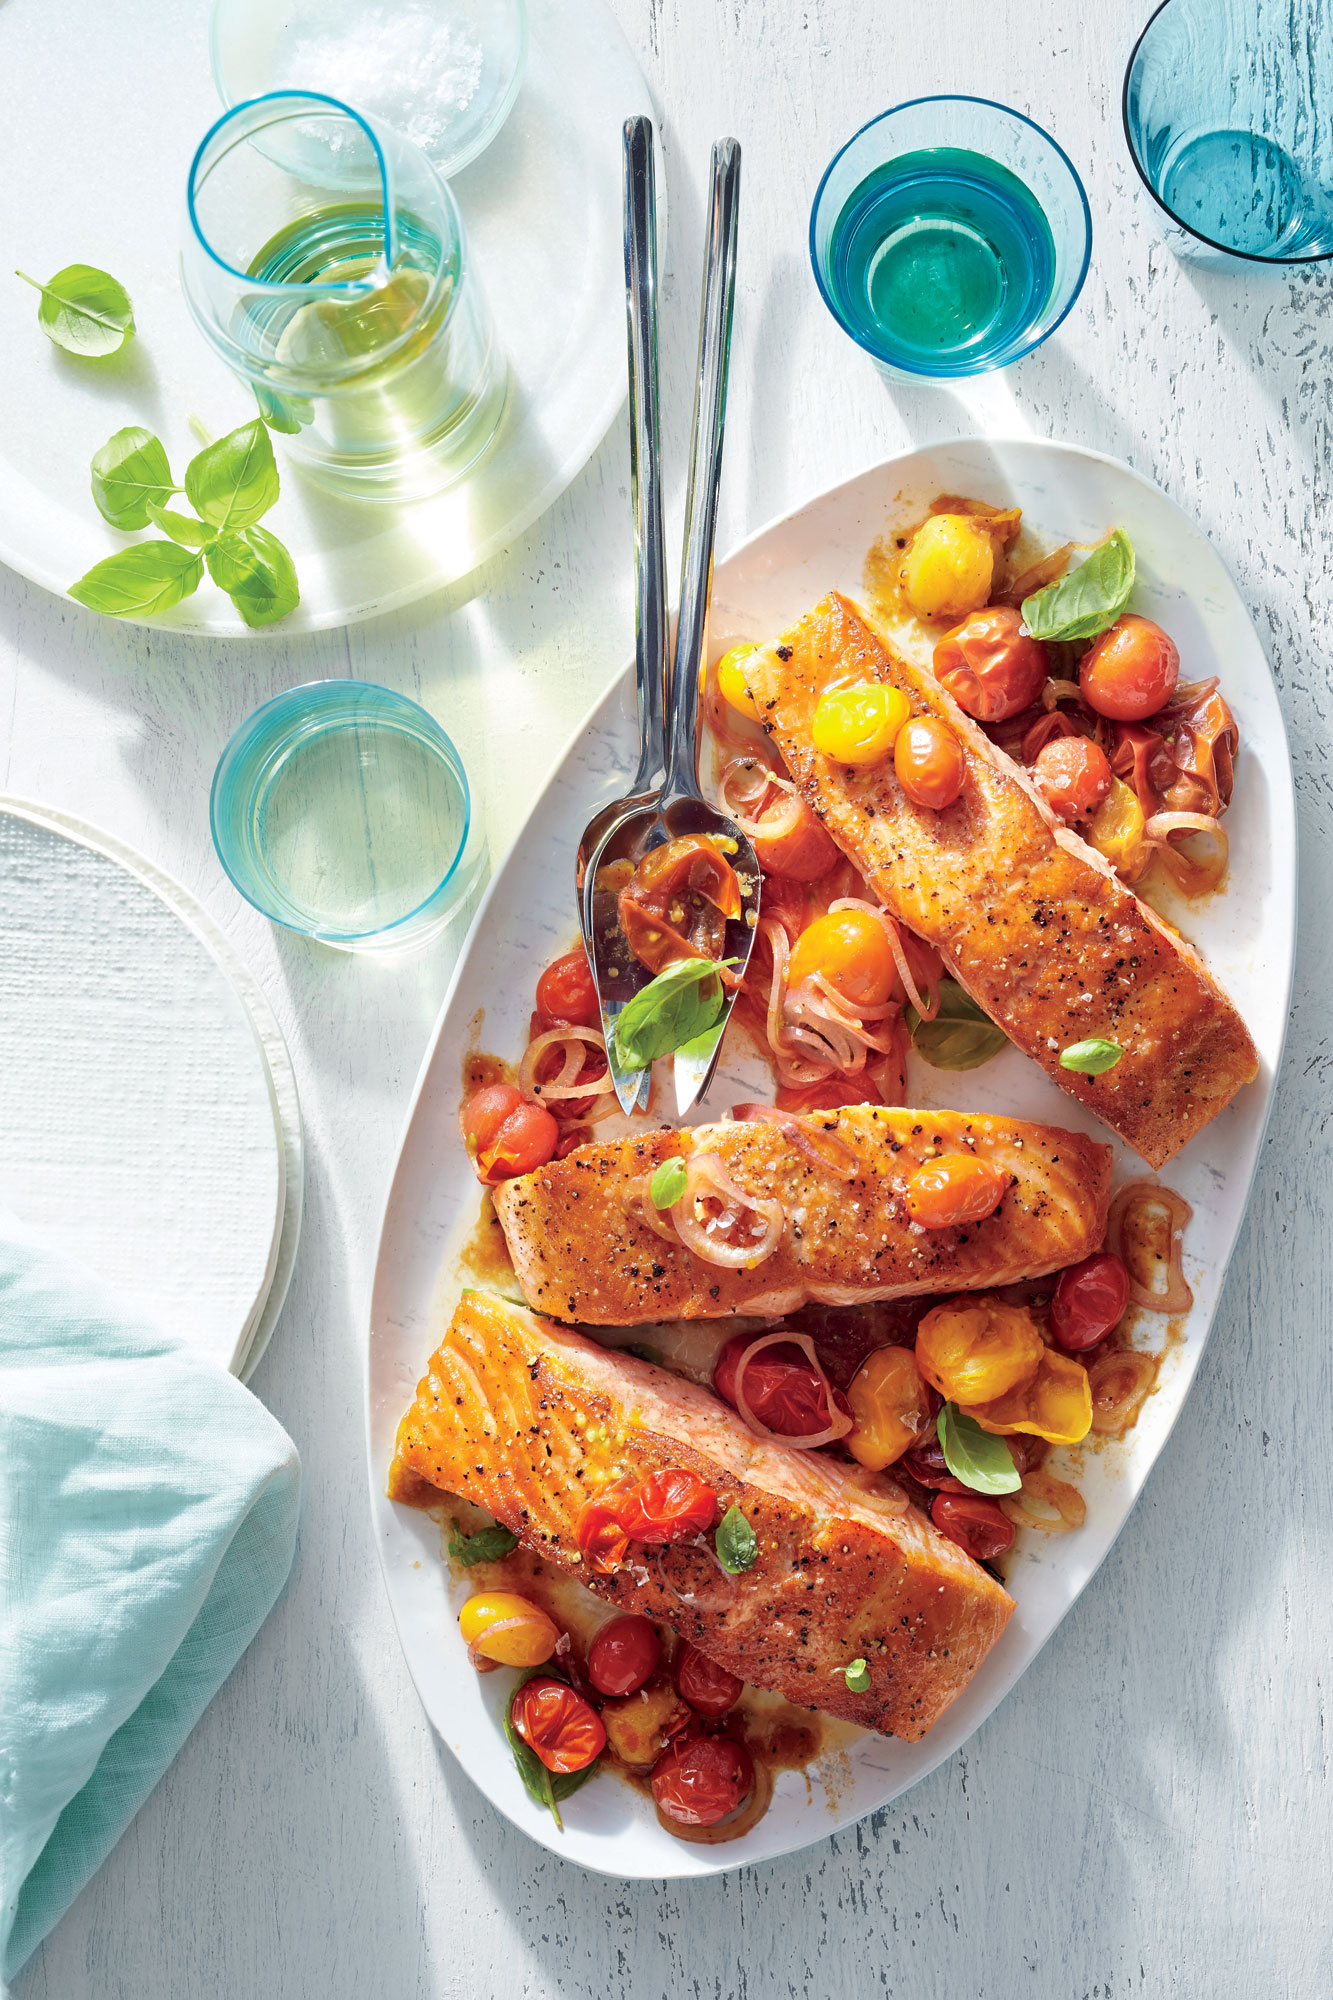 Seared Salmon with Balsamic-Blistered Tomatoes